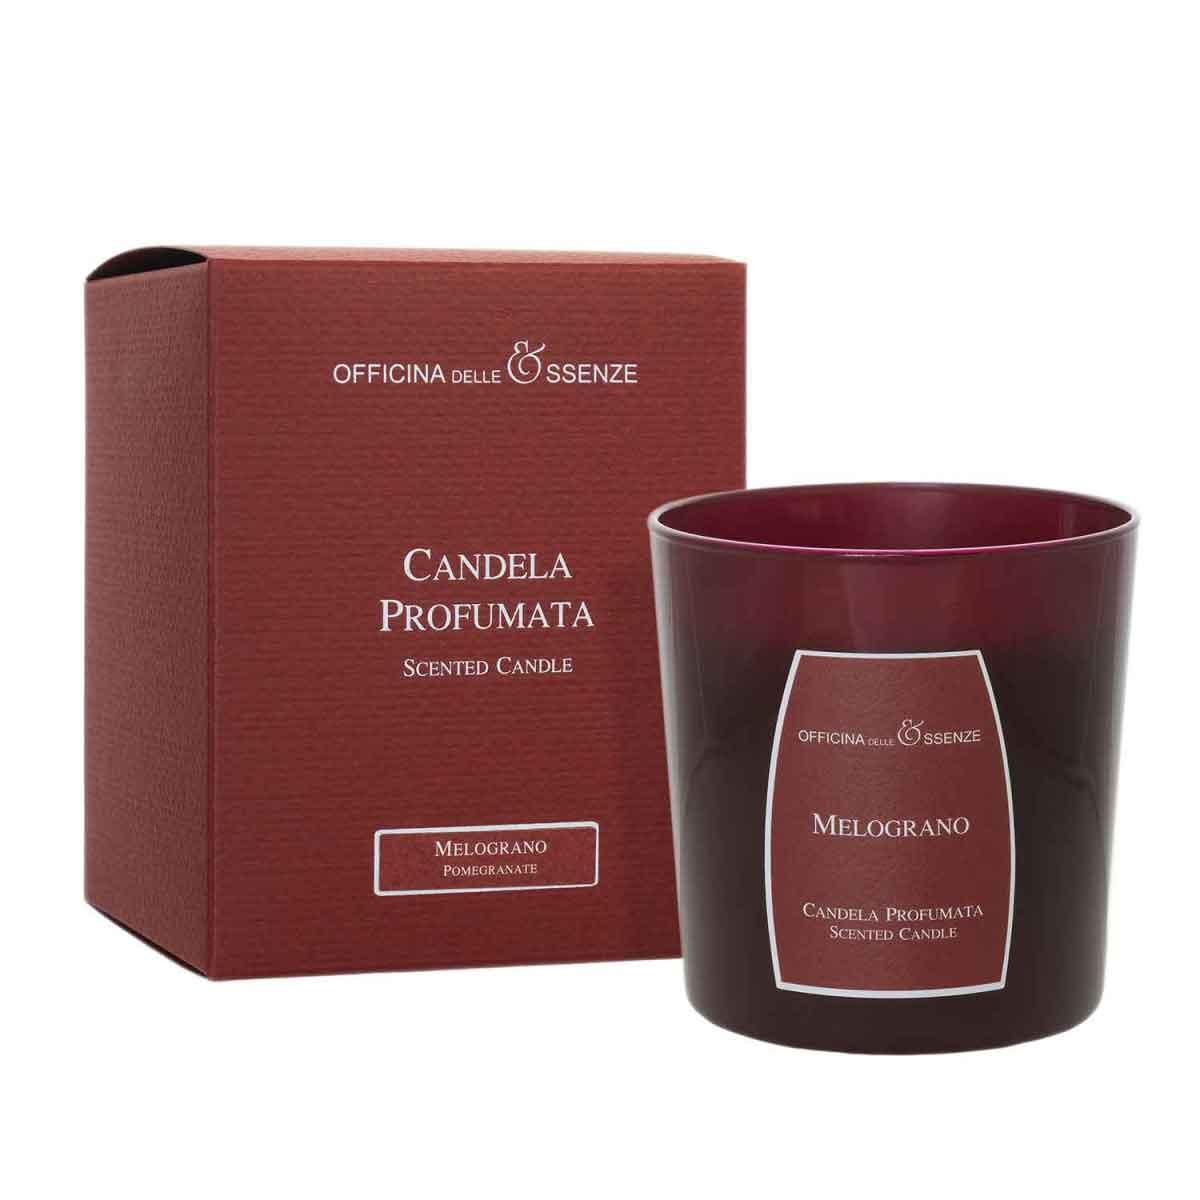 Pomegranate scented candle with box